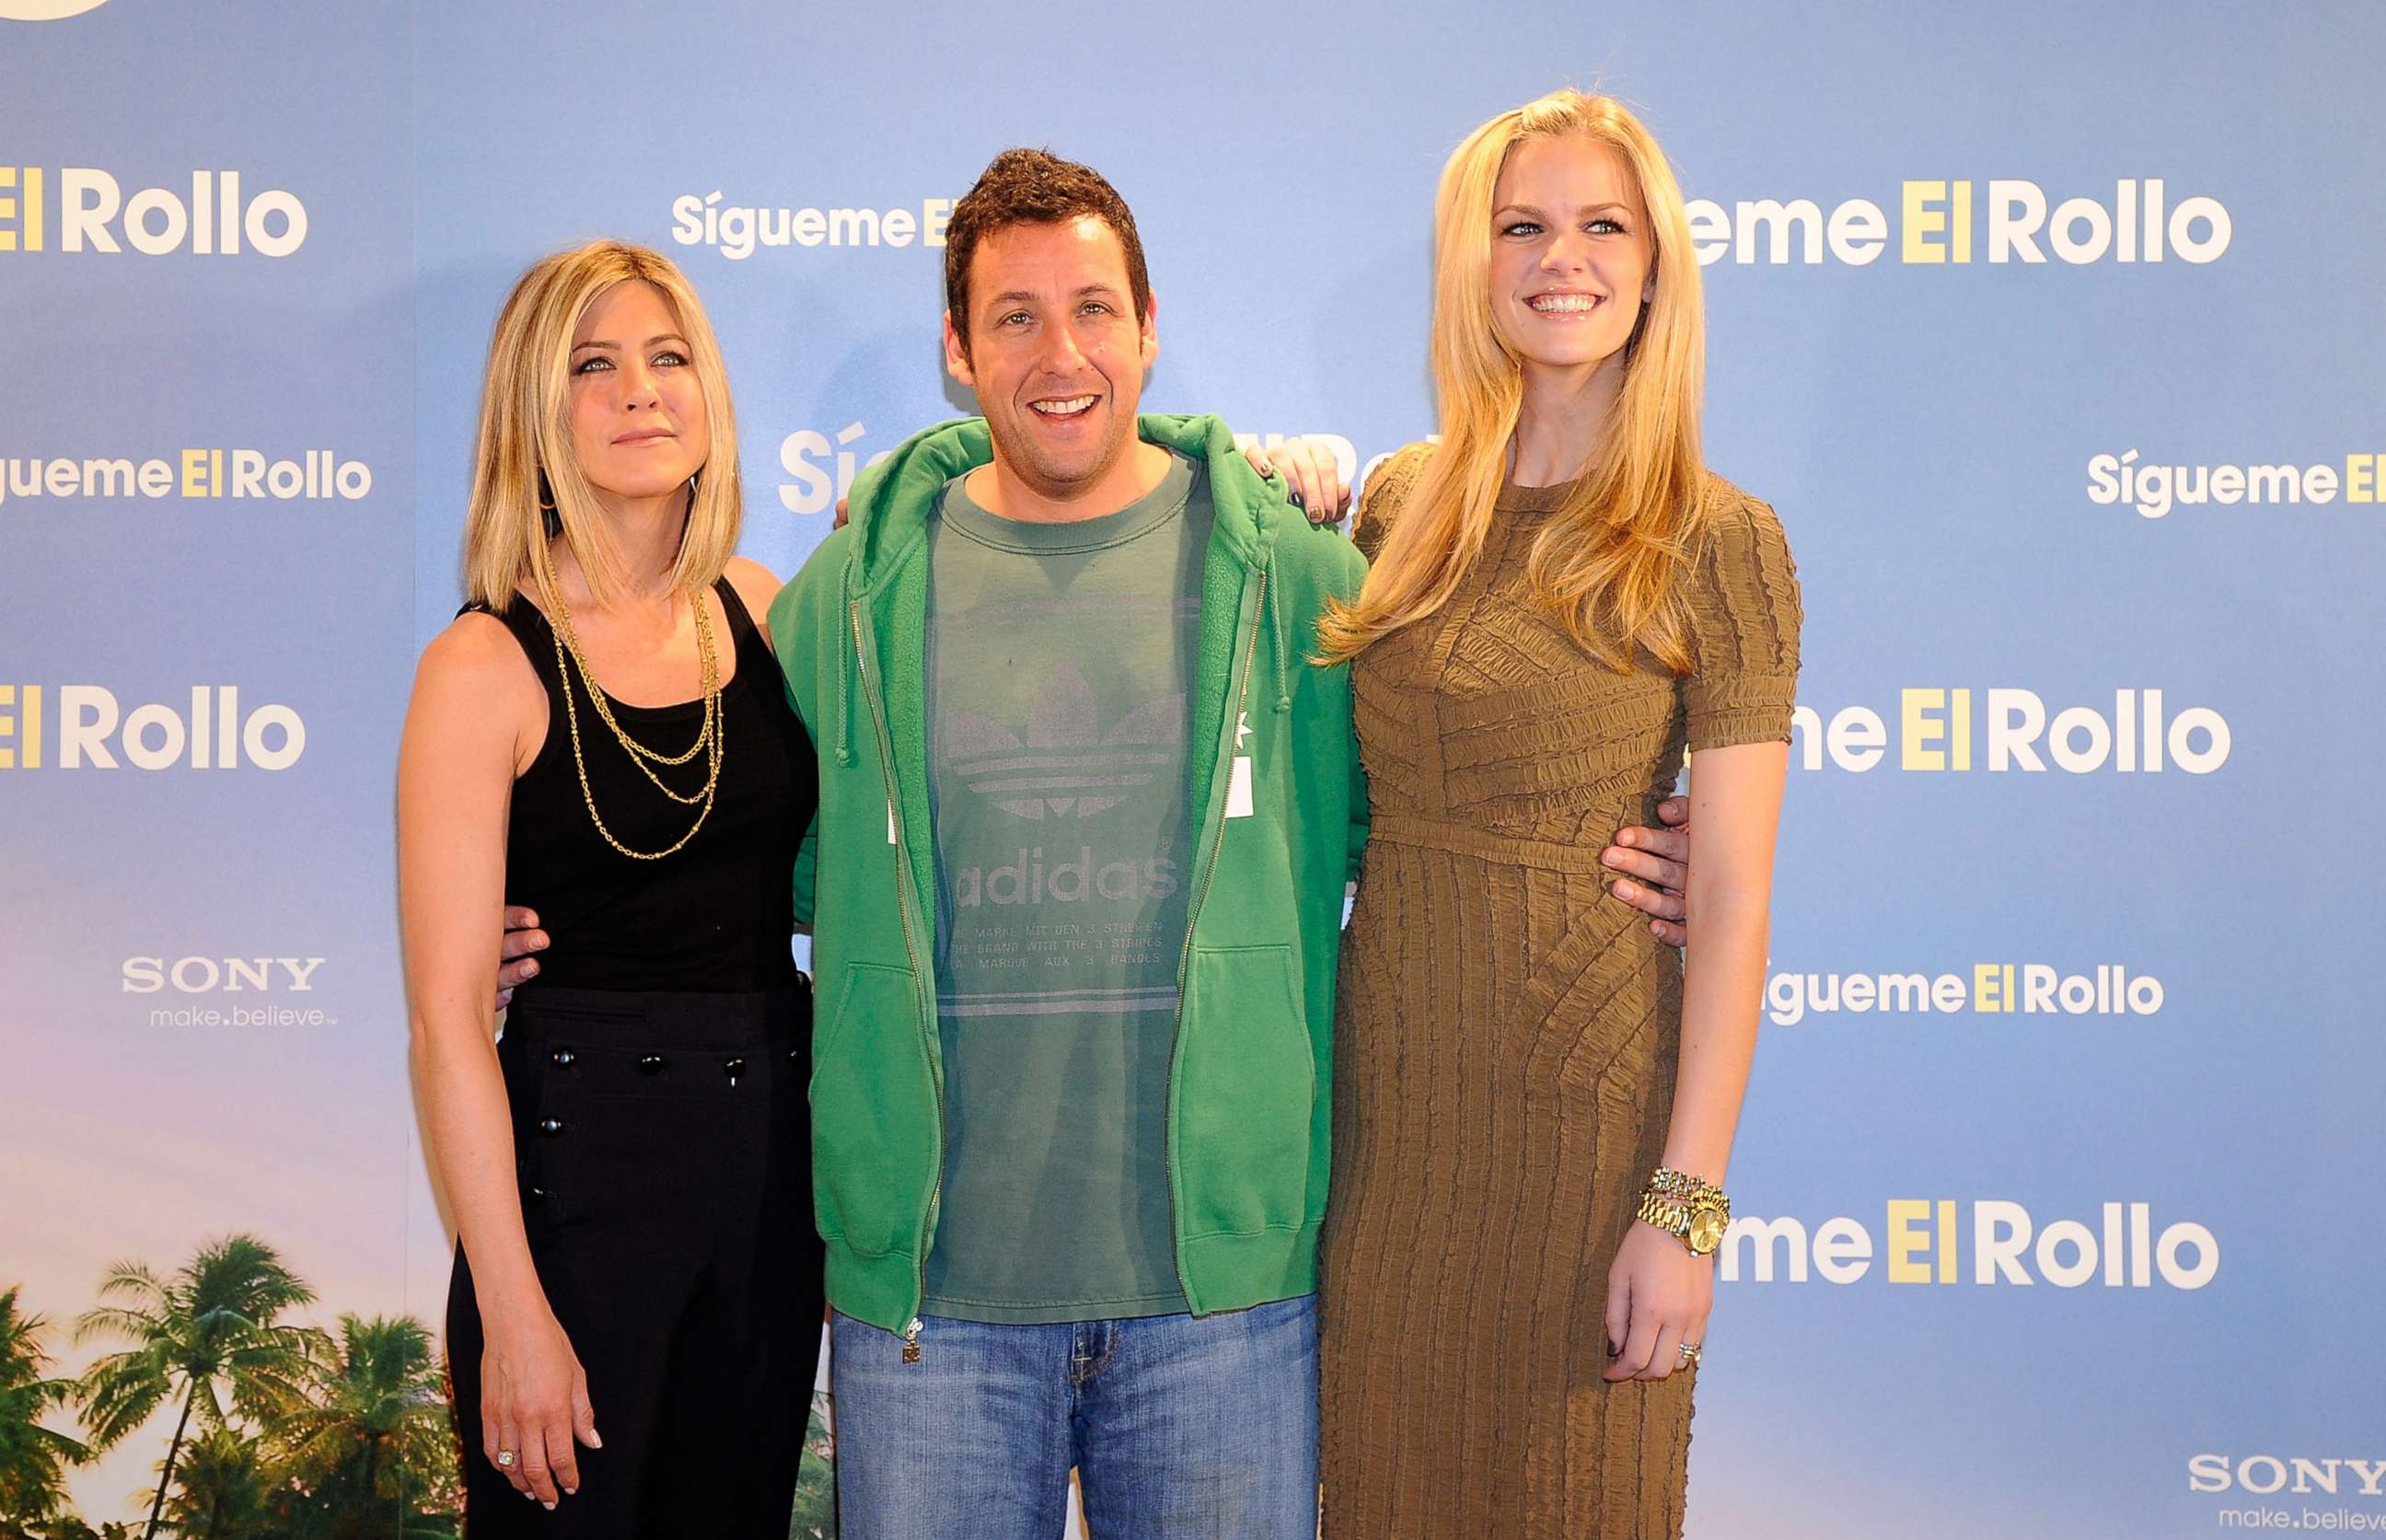 PHOTO: In this Feb. 22, 2011, file photo, Jennifer Aniston, Adam Sandler and Brooklyn Decker attend a photo call for 'Sigueme El Rollo' ('Just Go With It') in Madrid.